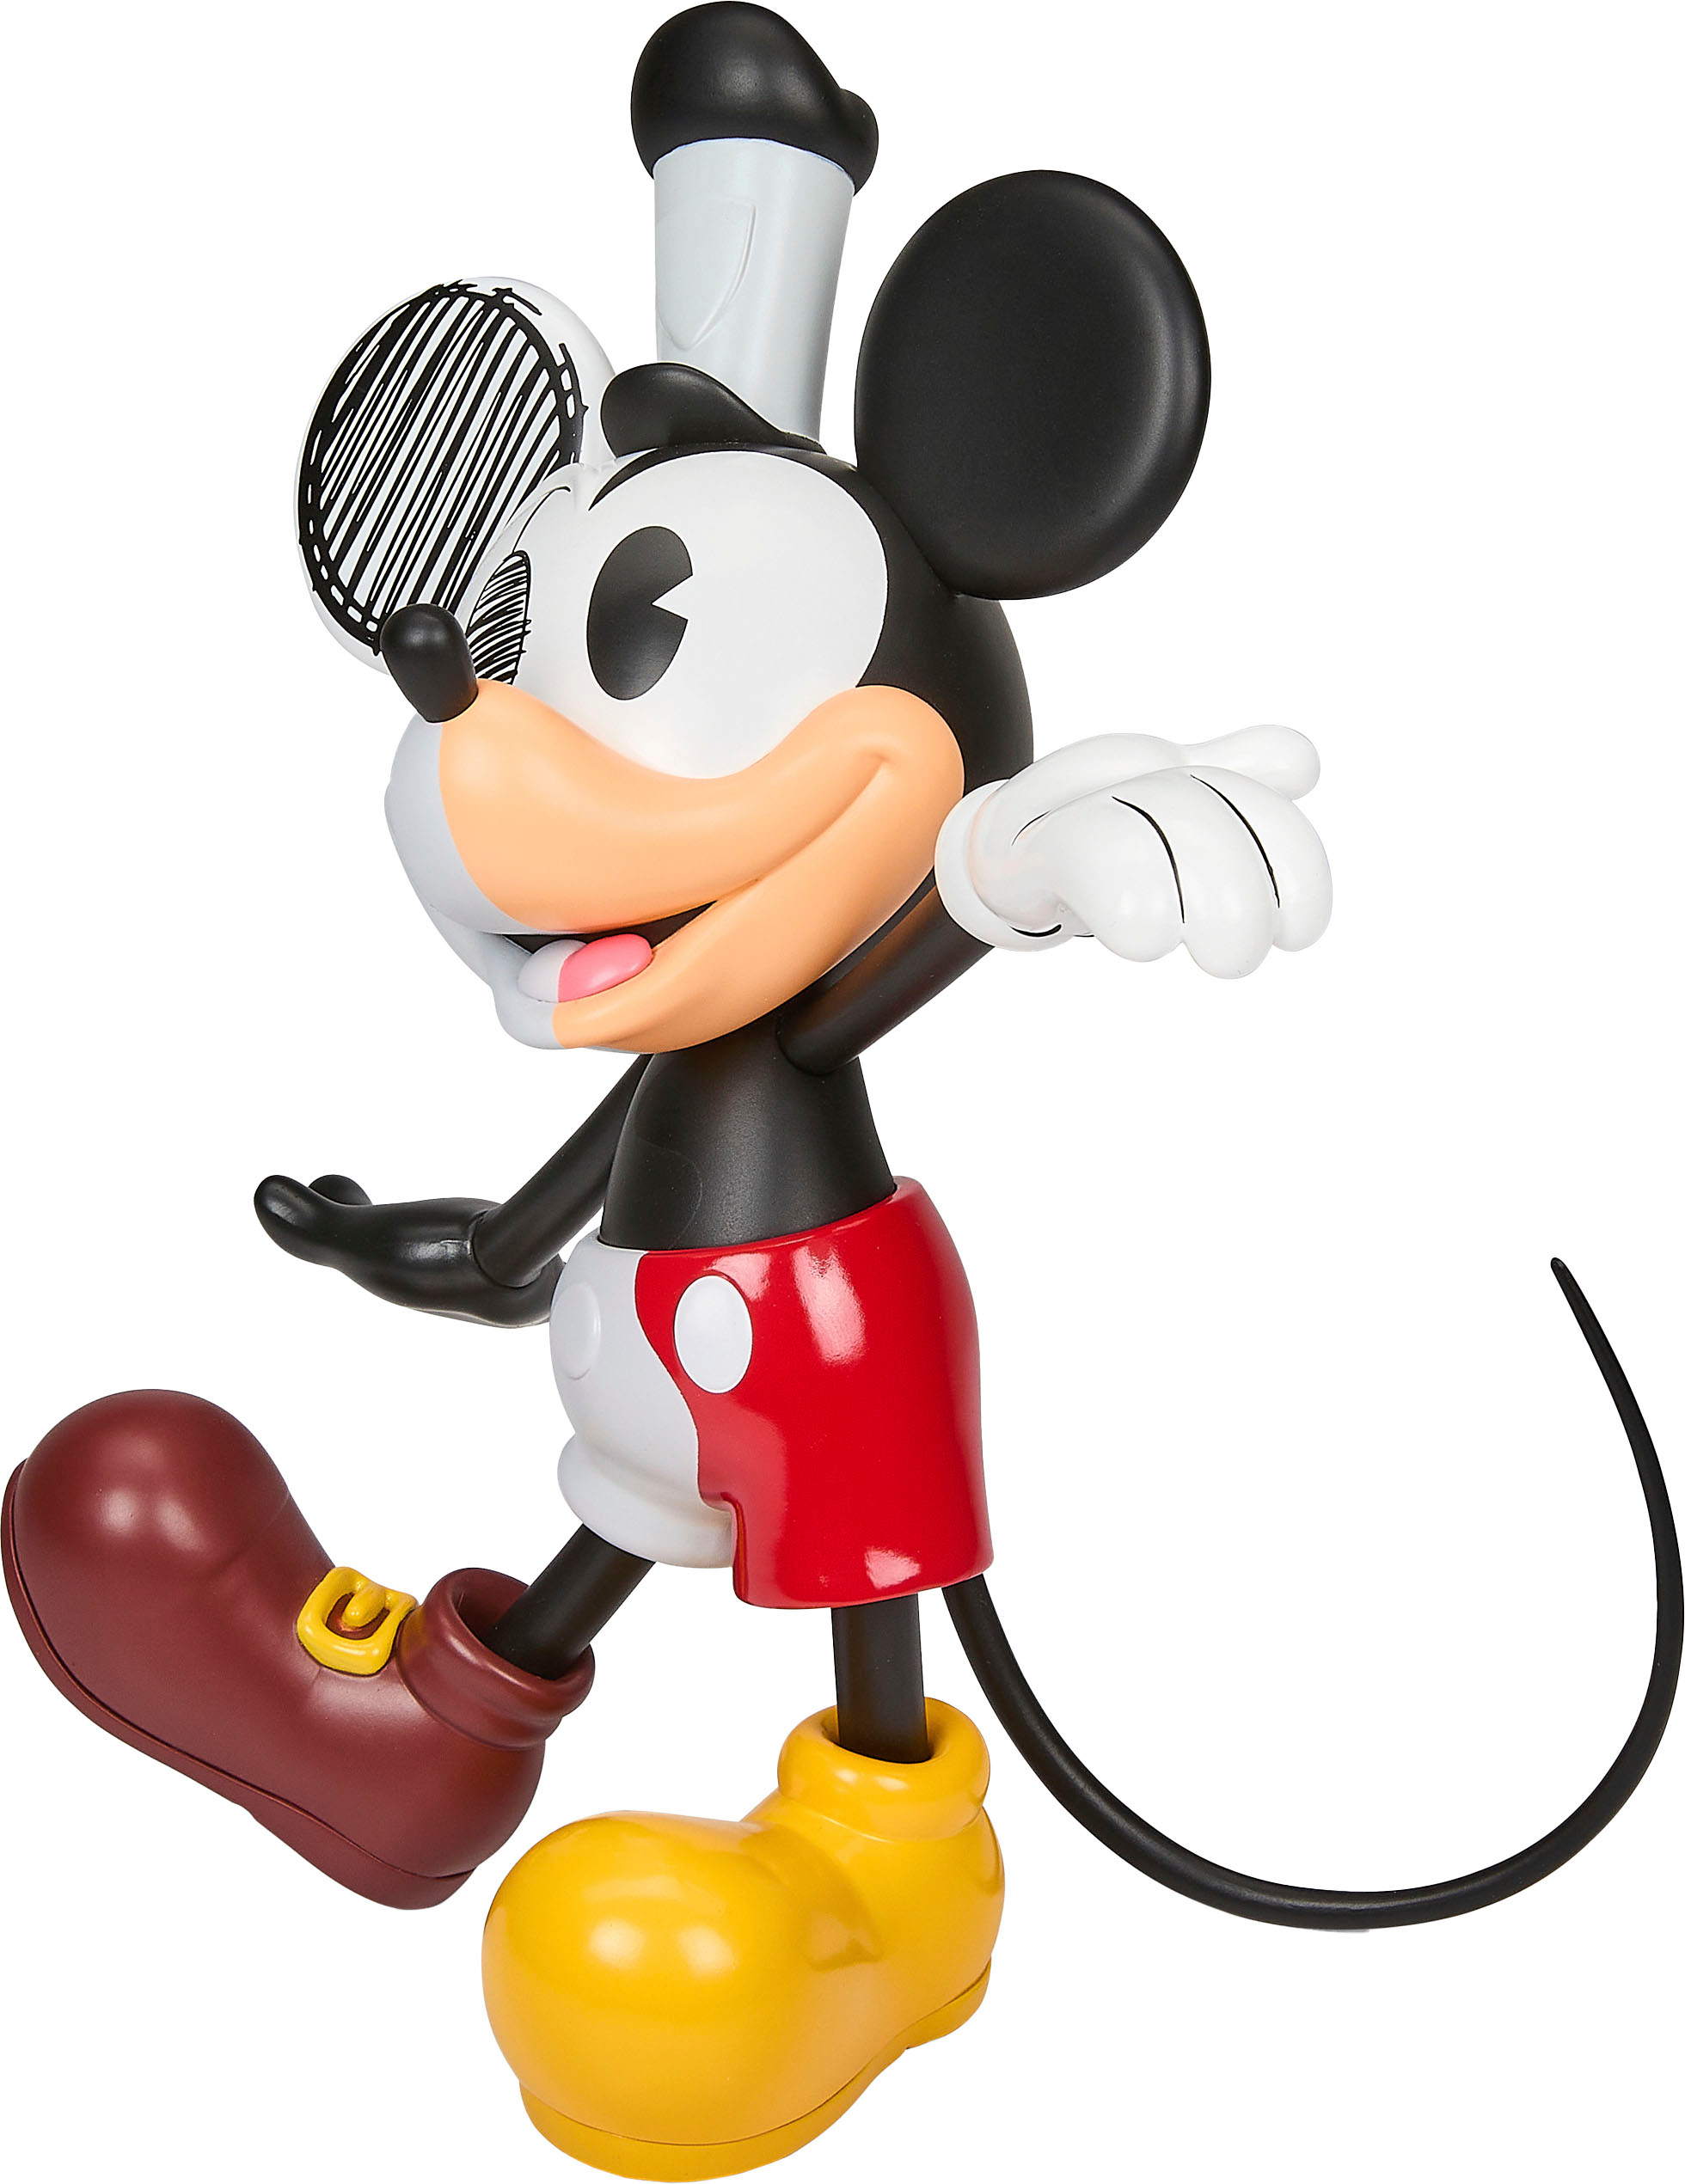 Hasbro Preschool Disney Classic Characters Mickey Mouse 70321 Toy Figure  New H27